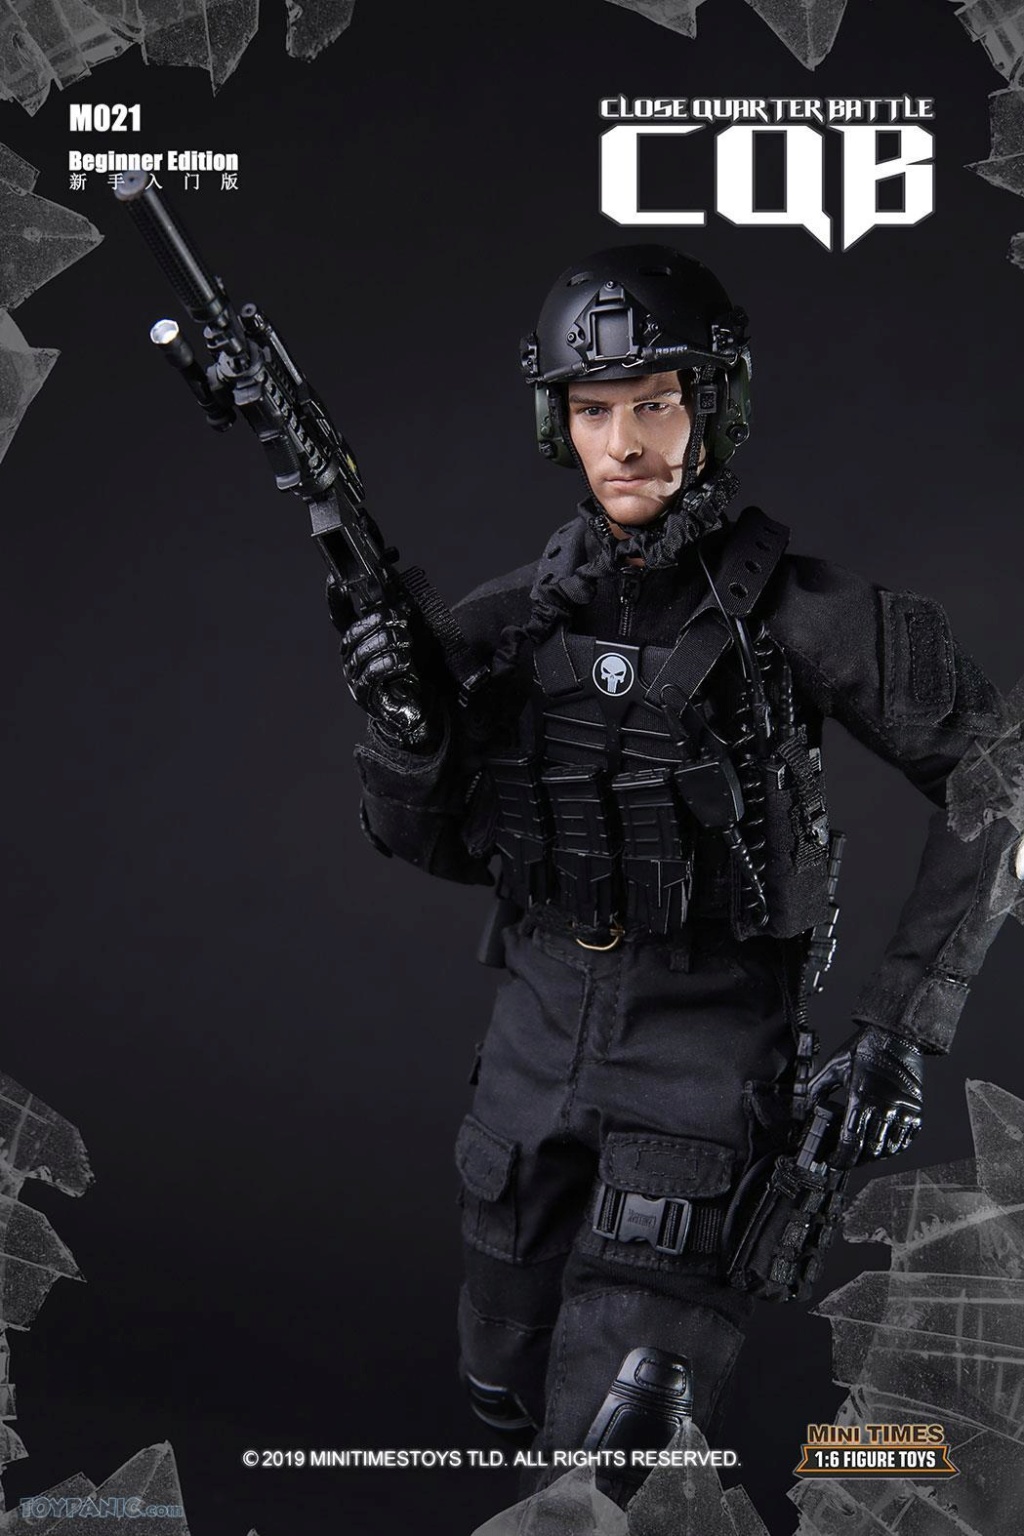 ModernMilitary - NEW PRODUCT: Mini Times Toys: 1/6 scale Close Quarter Battle CQB (Beginner Edition) 17202022